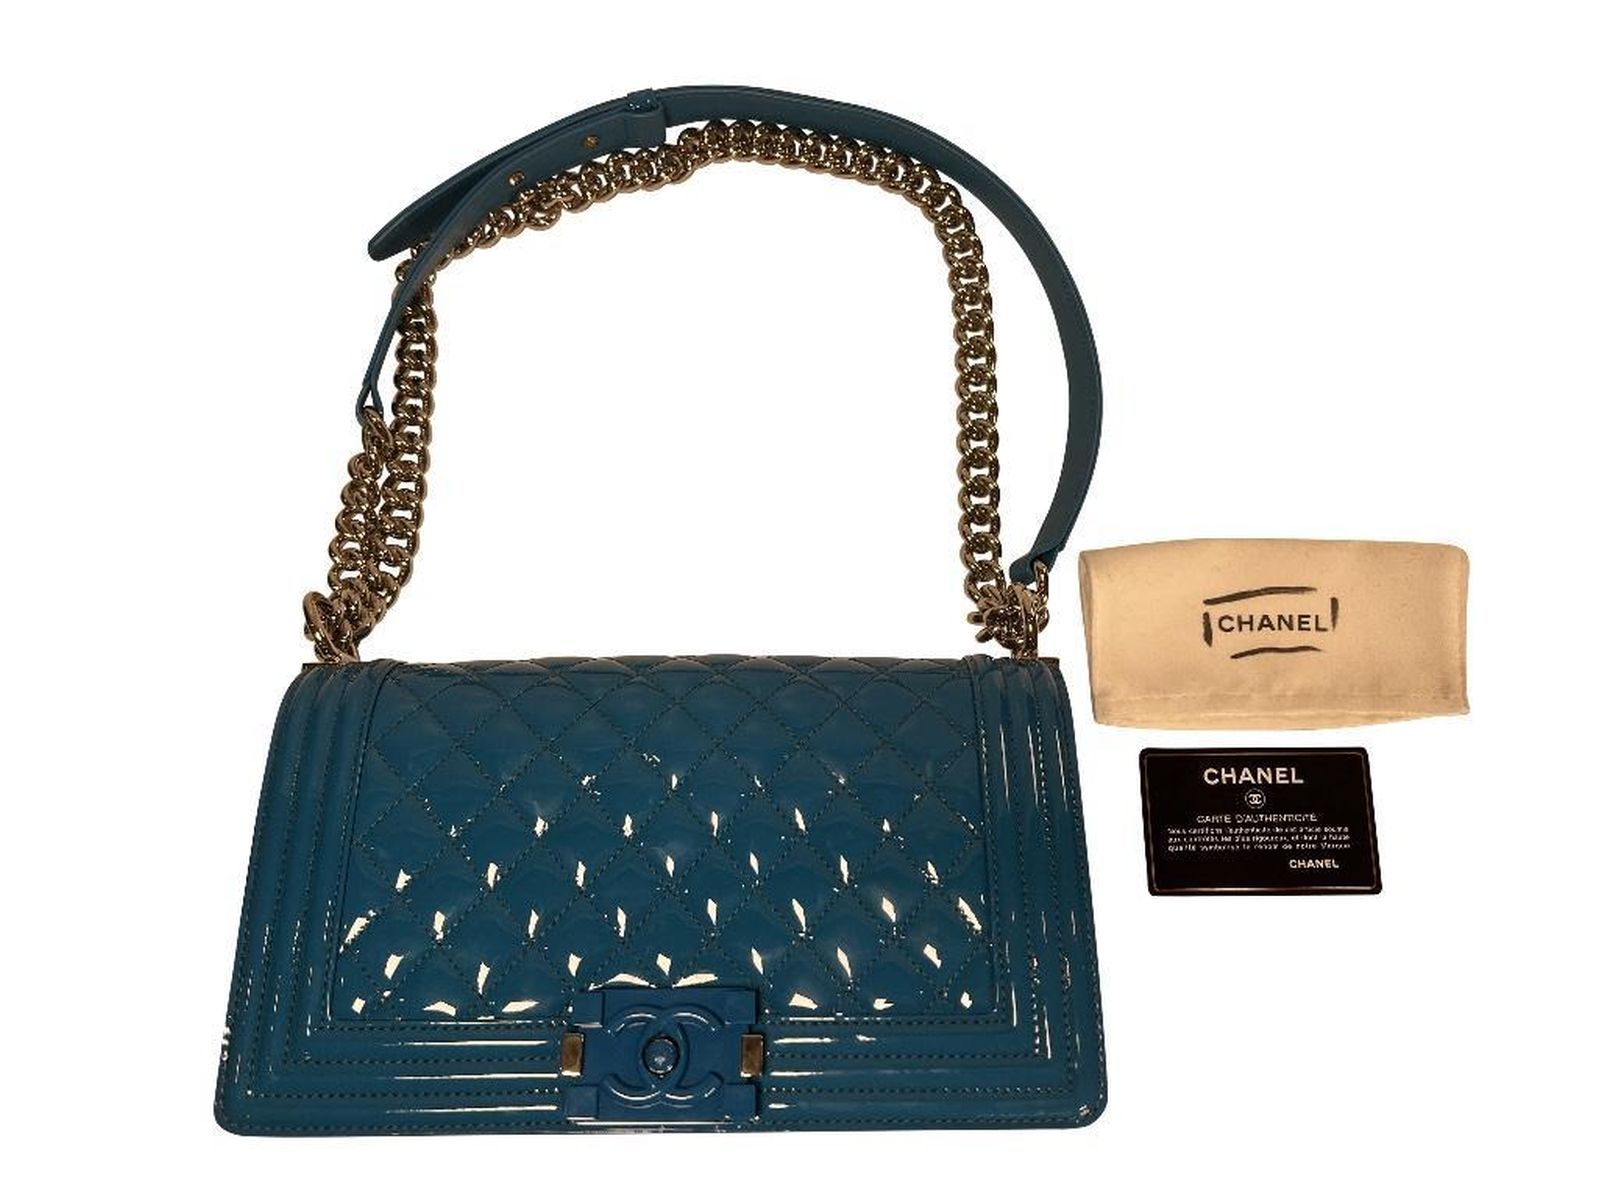 Chanel Blue Quilted Patent Leather Medium Boy Bag - Image 8 of 8